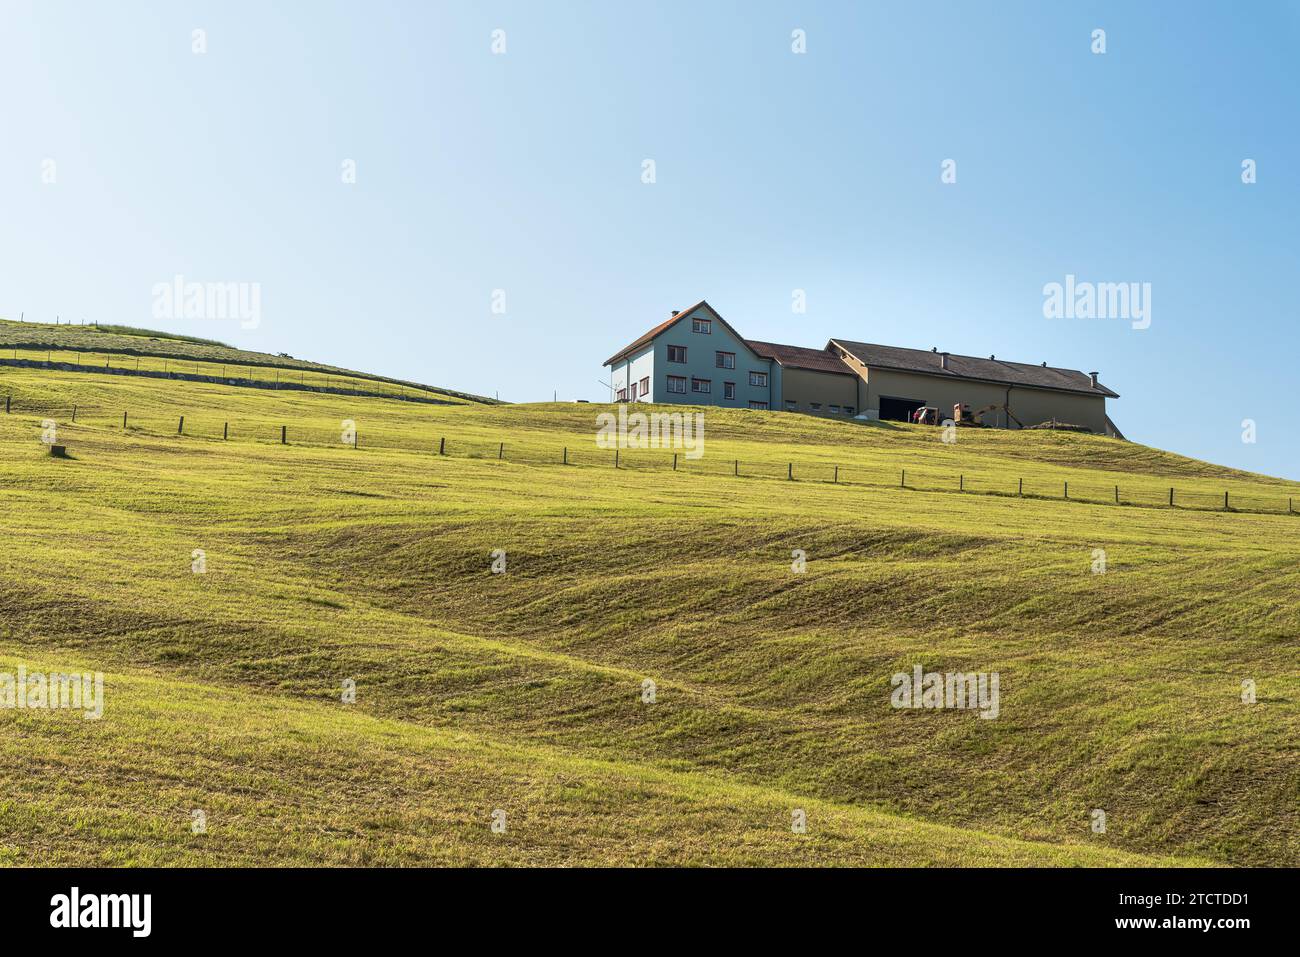 Typical Appenzell farm house on a hill, rural landscape, Canton of Appenzell Innerrhoden, Switzerland Stock Photo